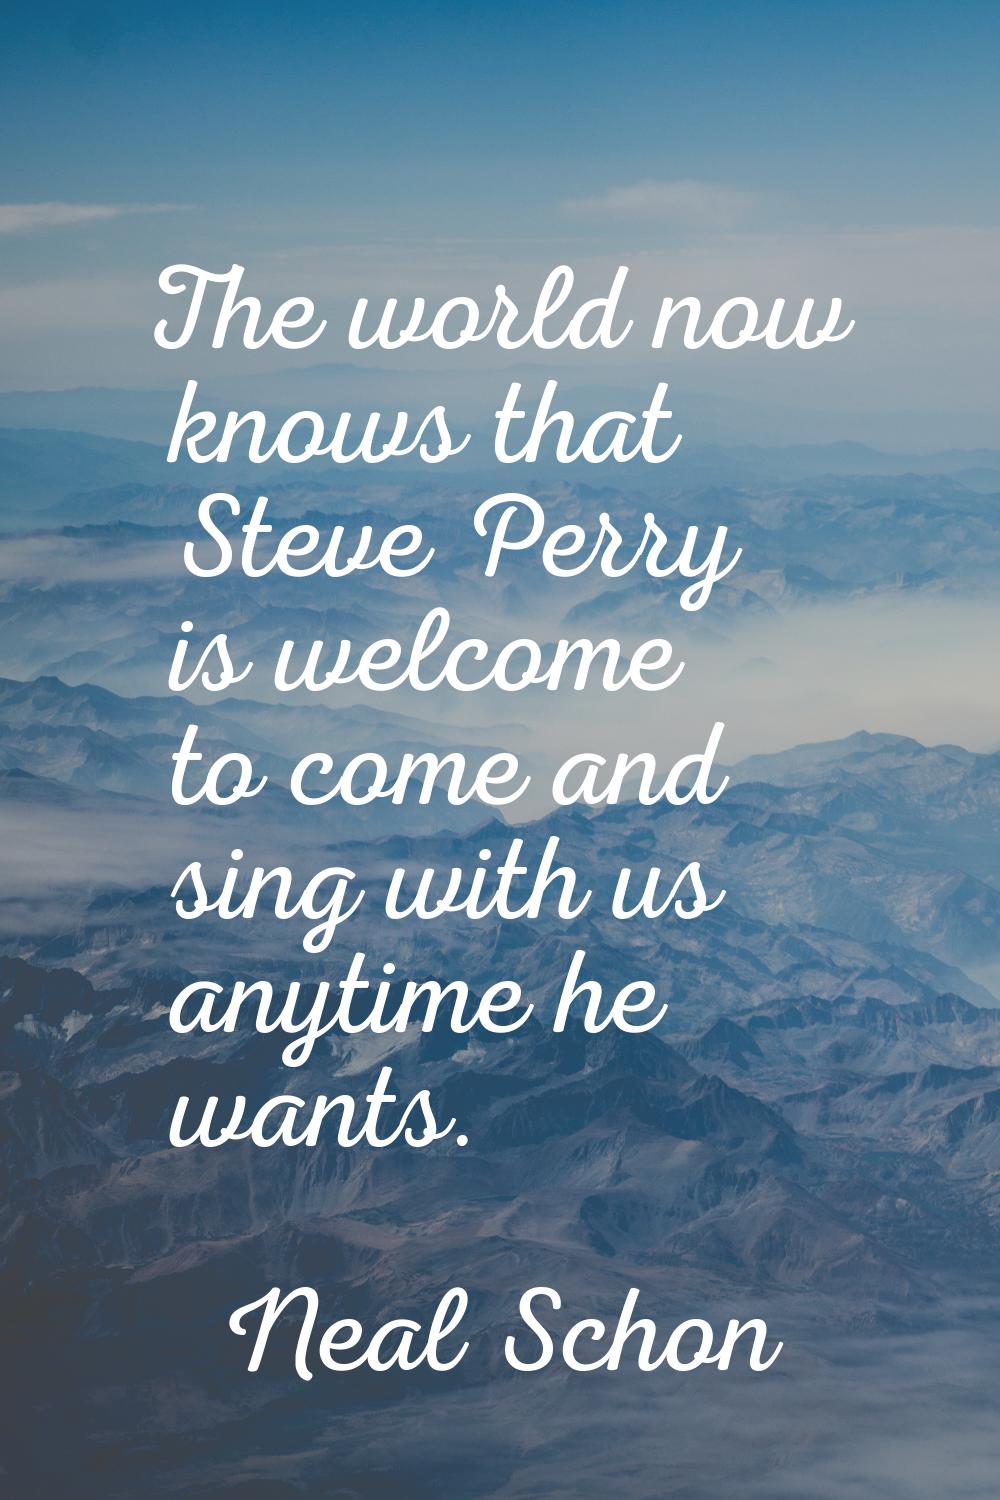 The world now knows that Steve Perry is welcome to come and sing with us anytime he wants.